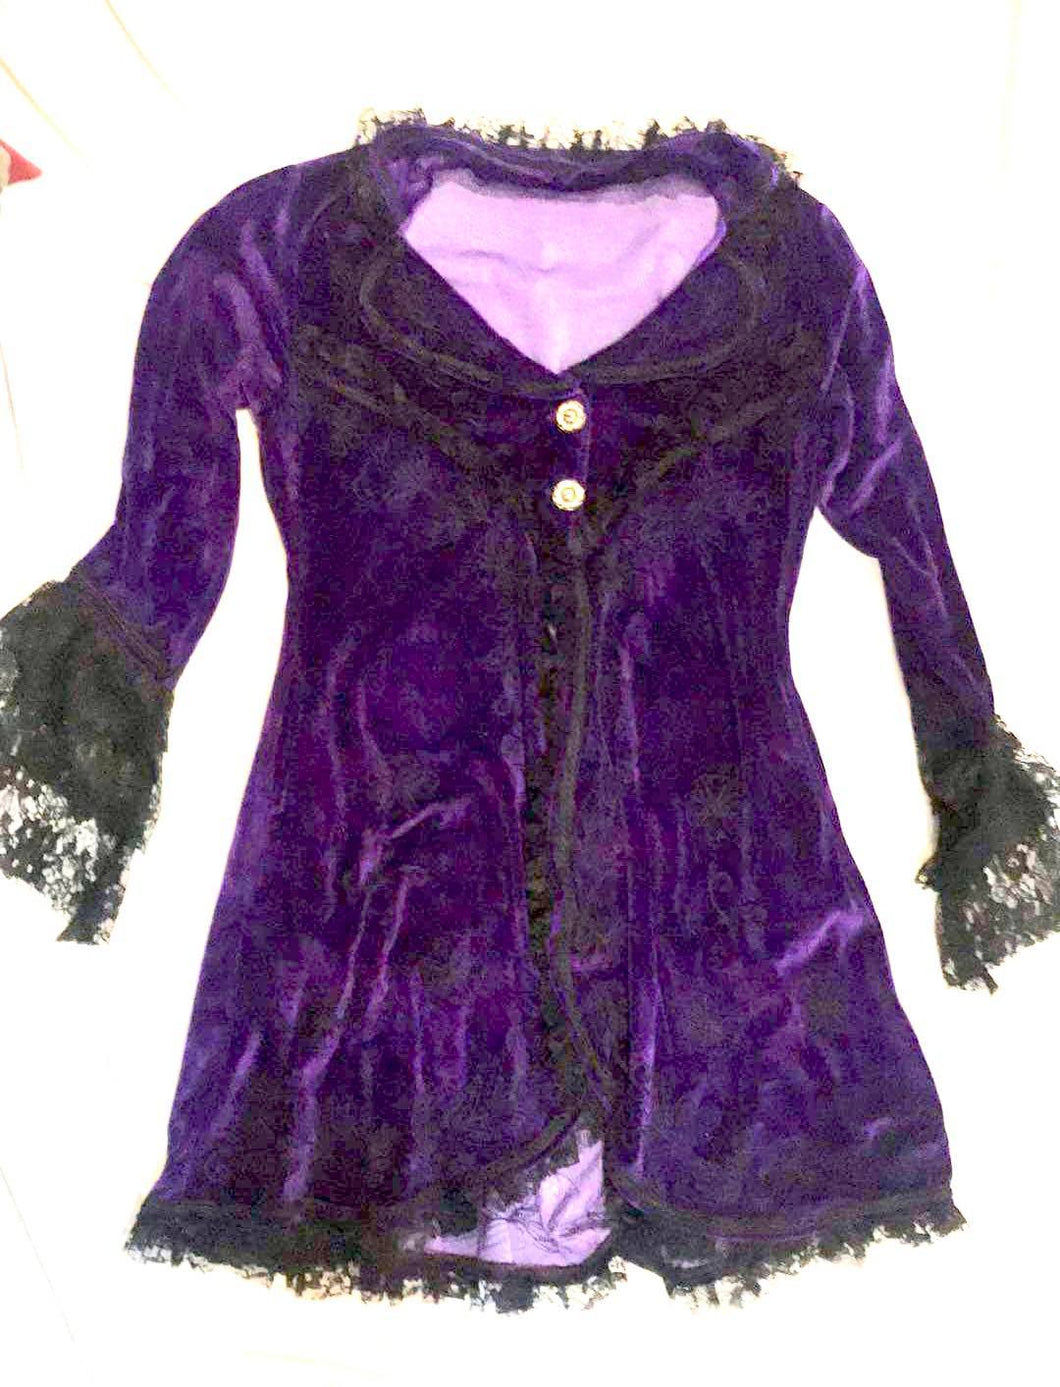 Velvet Jacket with Lace